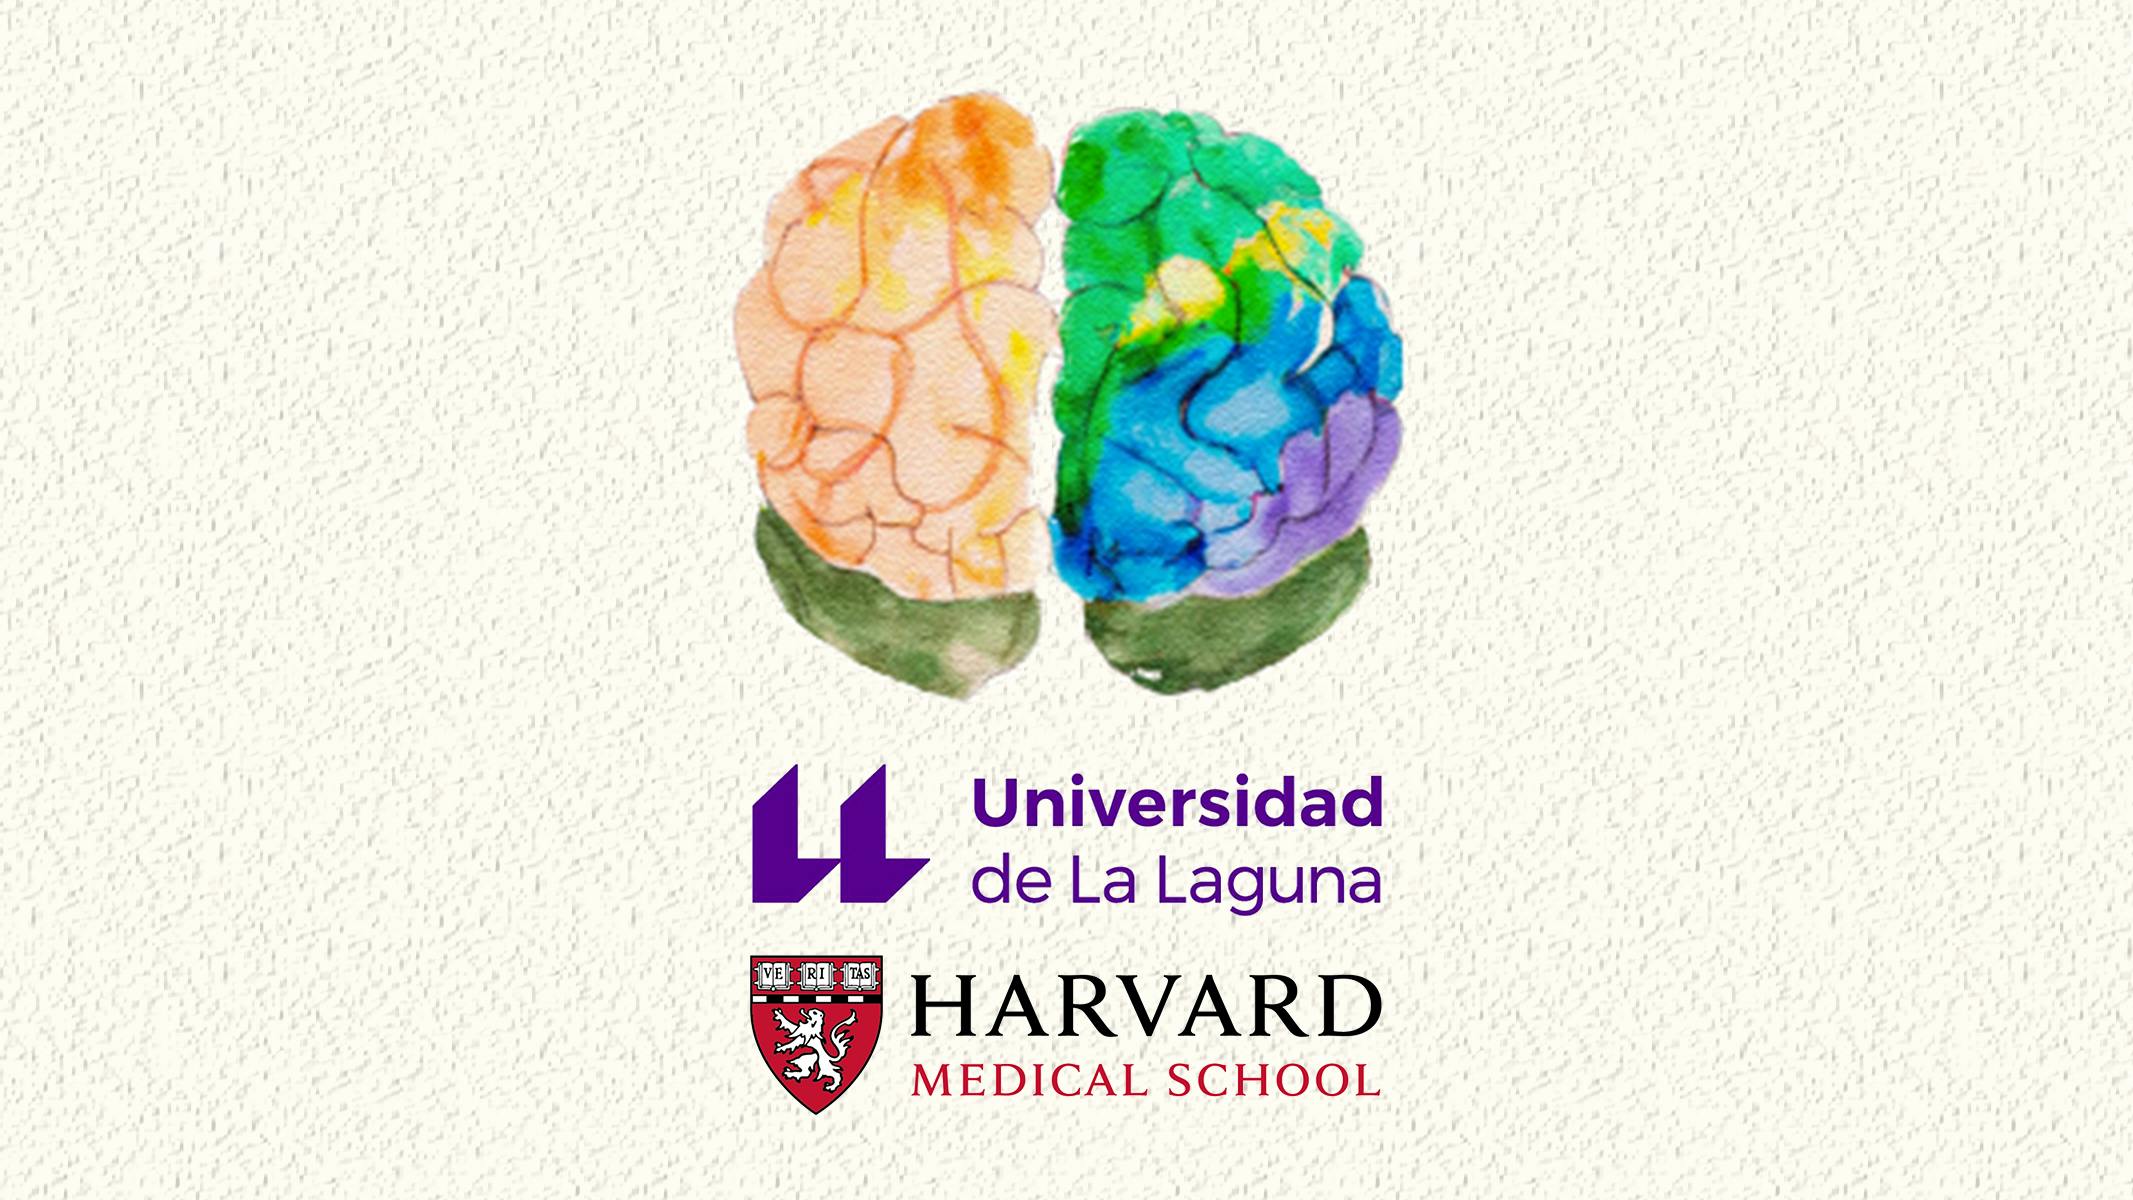 Artistic illustration of a colorful brain underlying which are positioned the logo of Universidad de La Lagura and the logo of Harvard Medical School.